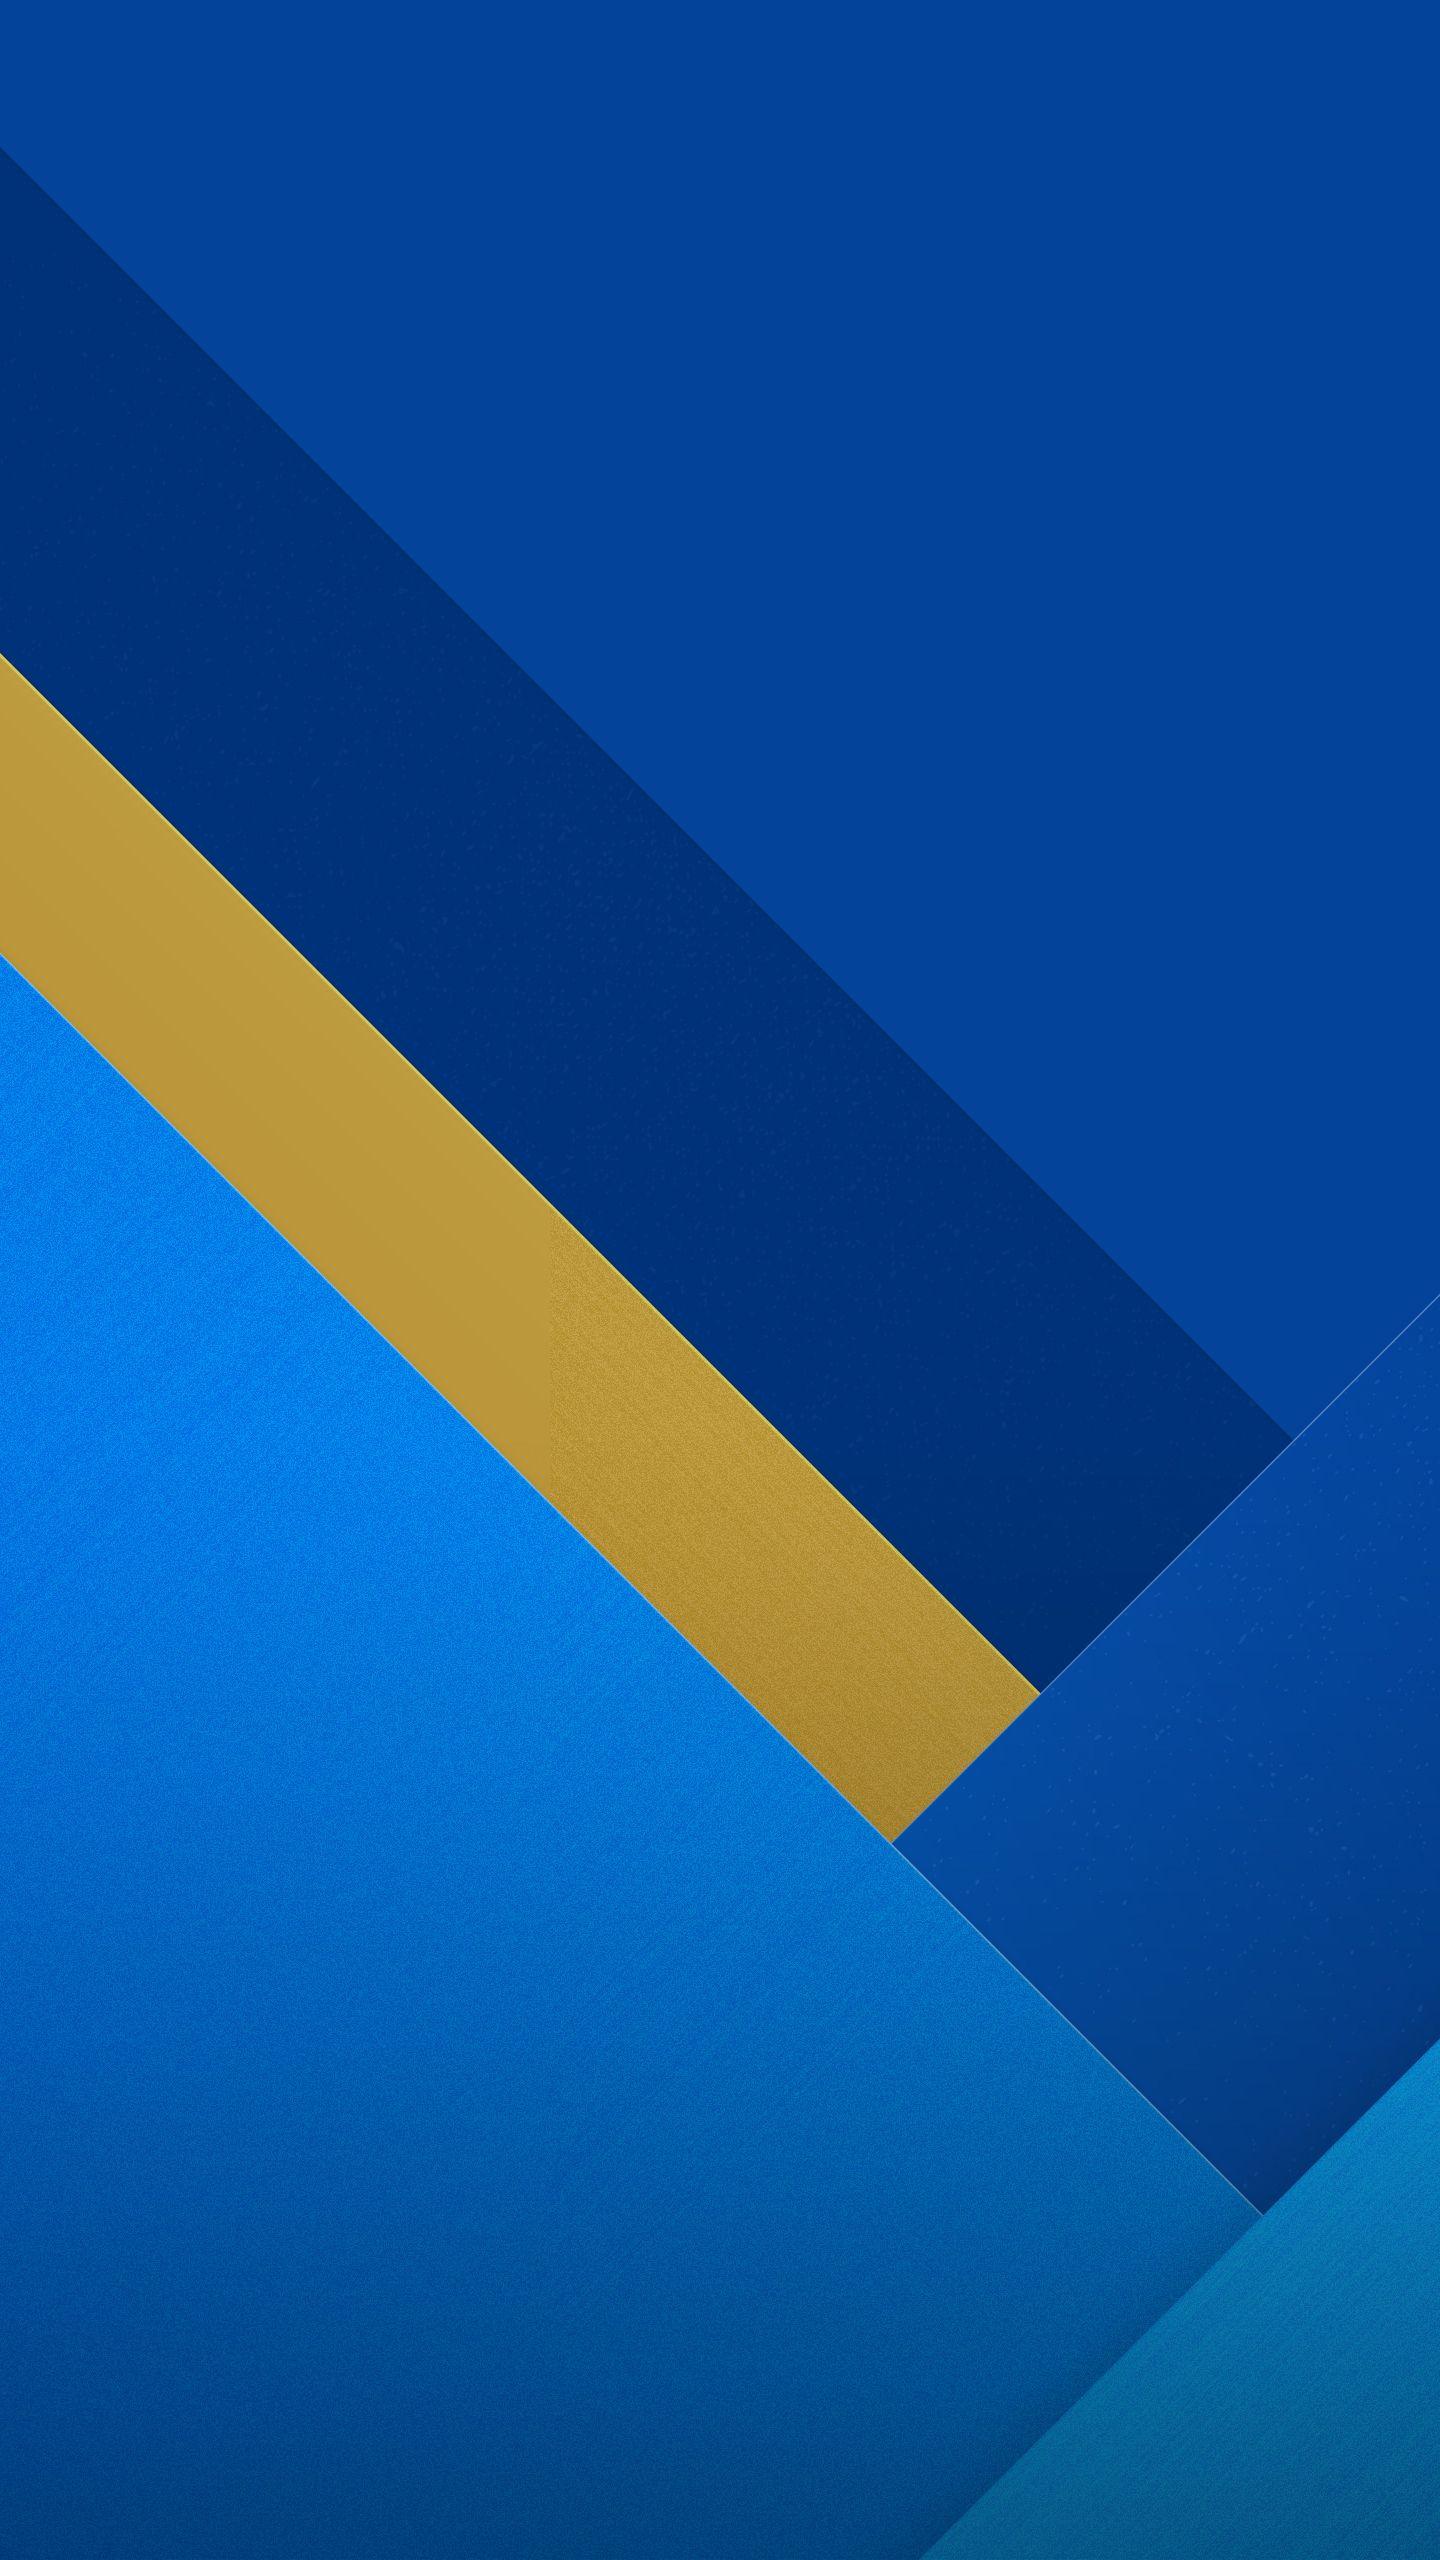 Diagonal Lines 3 for Samsung Galaxy S7 and Edge Wallpaper. HD